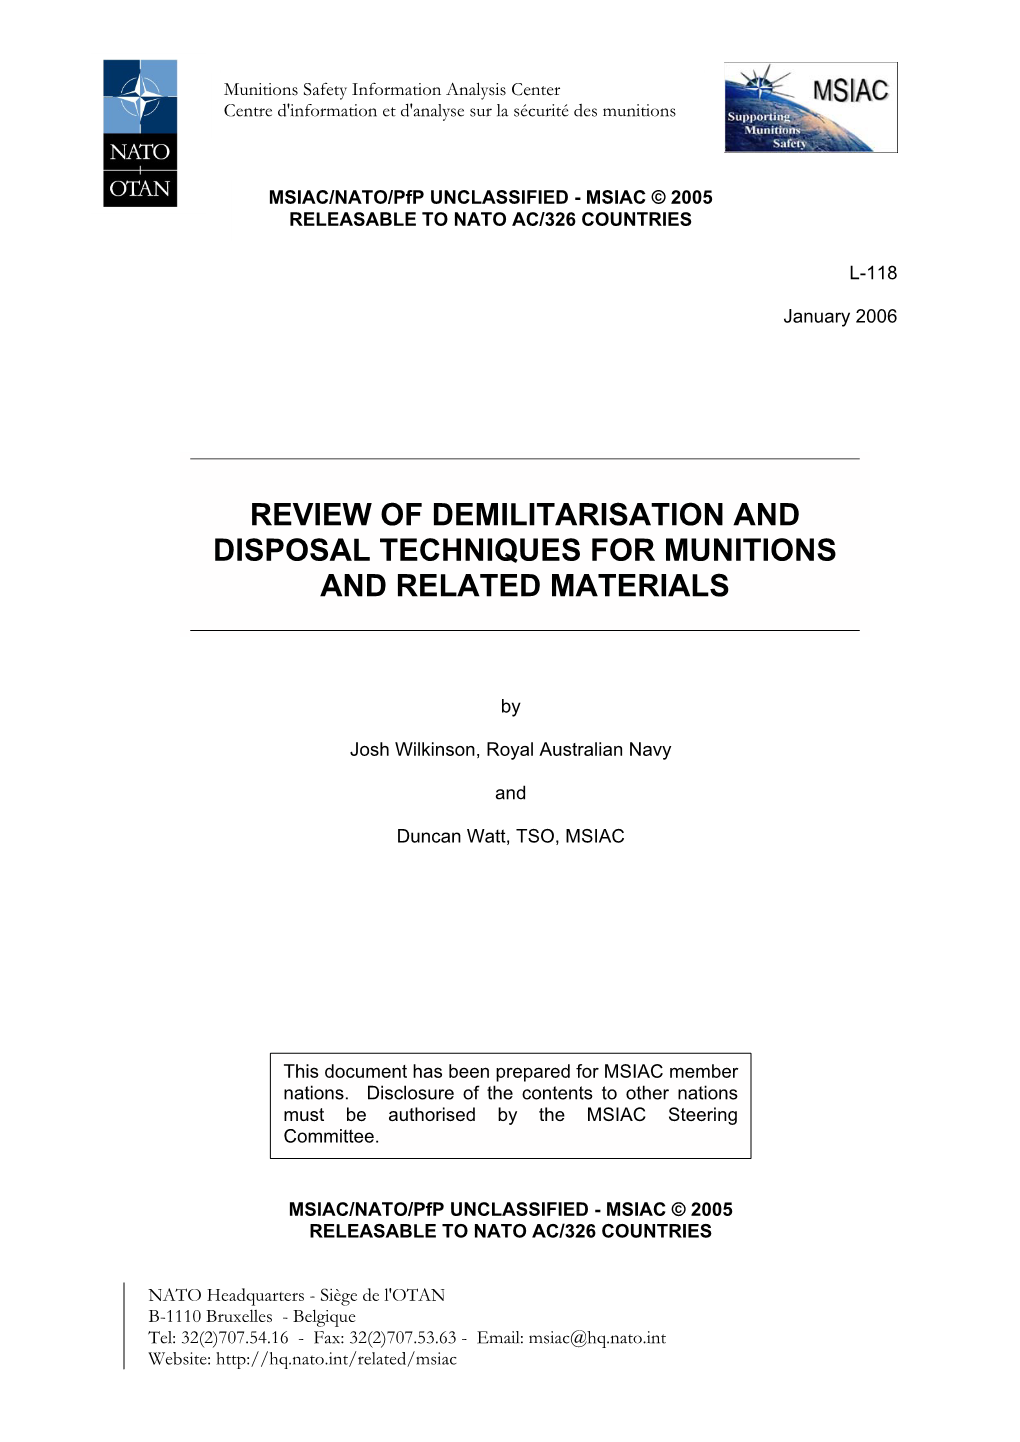 Review of Demilitarisation and Disposal Techniques for Munitions and Related Materials